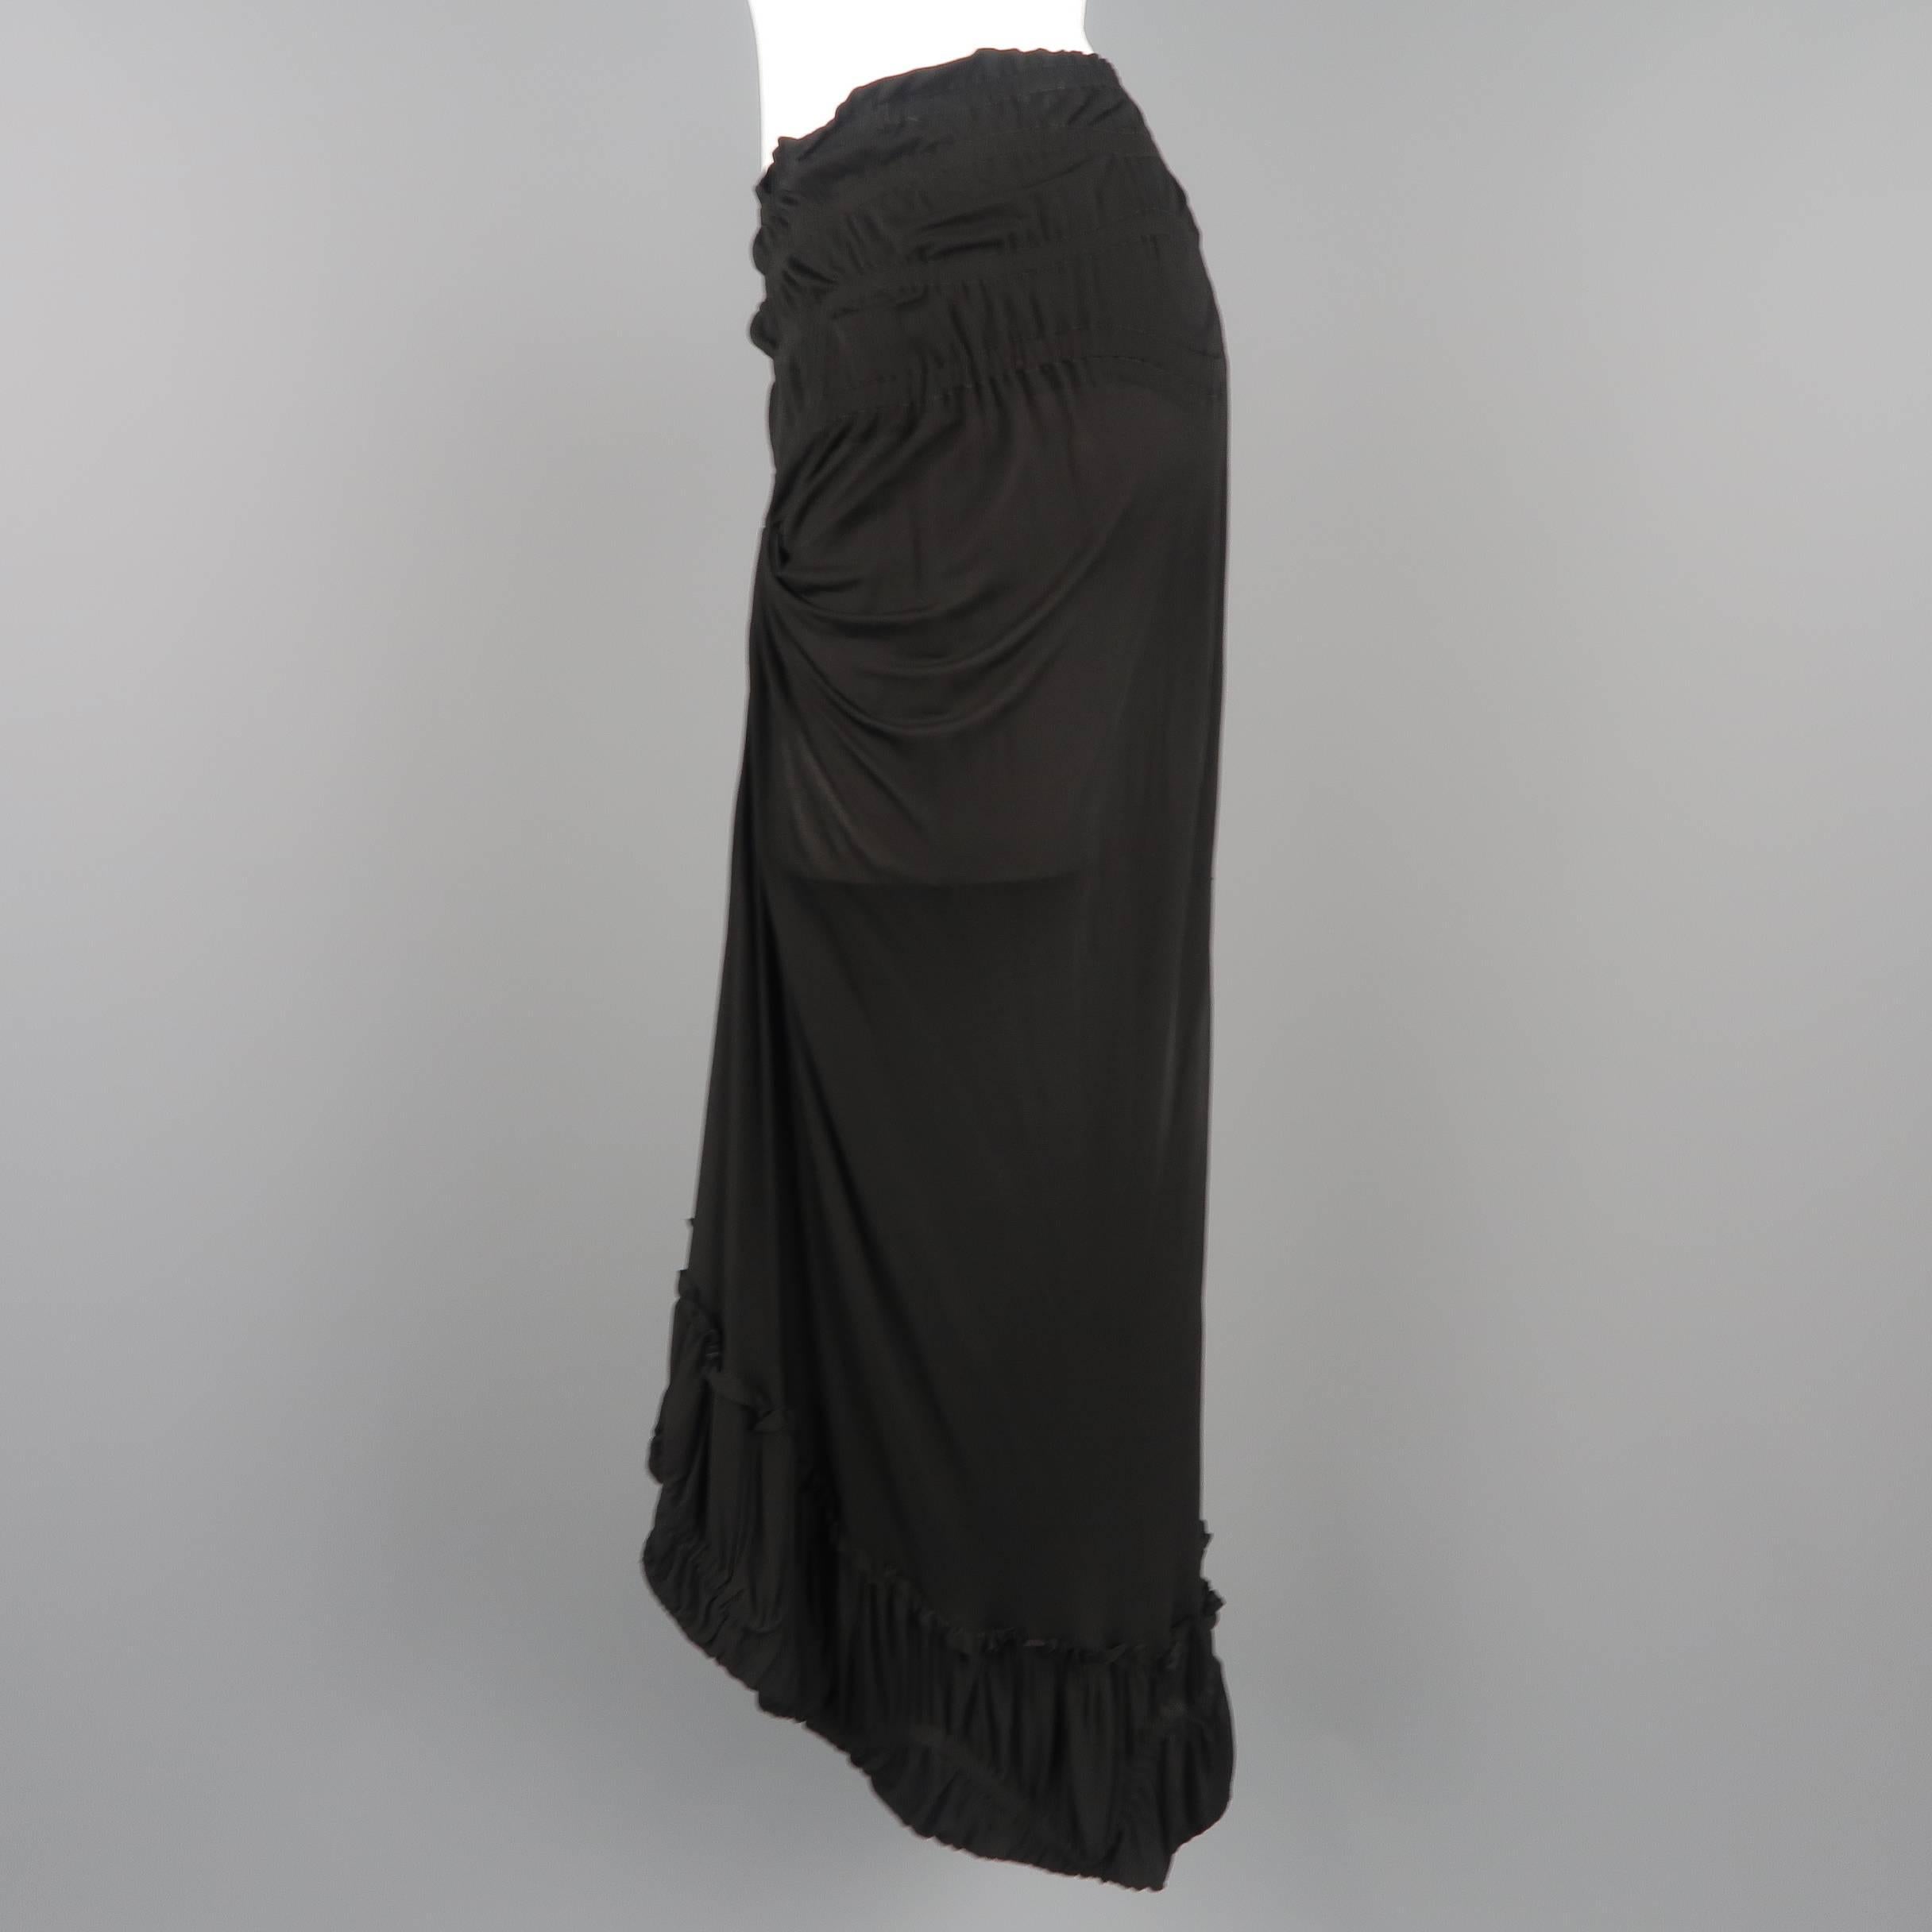 YVES SAINT LAURENT by TOM FORD Size M Black Gathered Viscose Ruffle Skirt 1